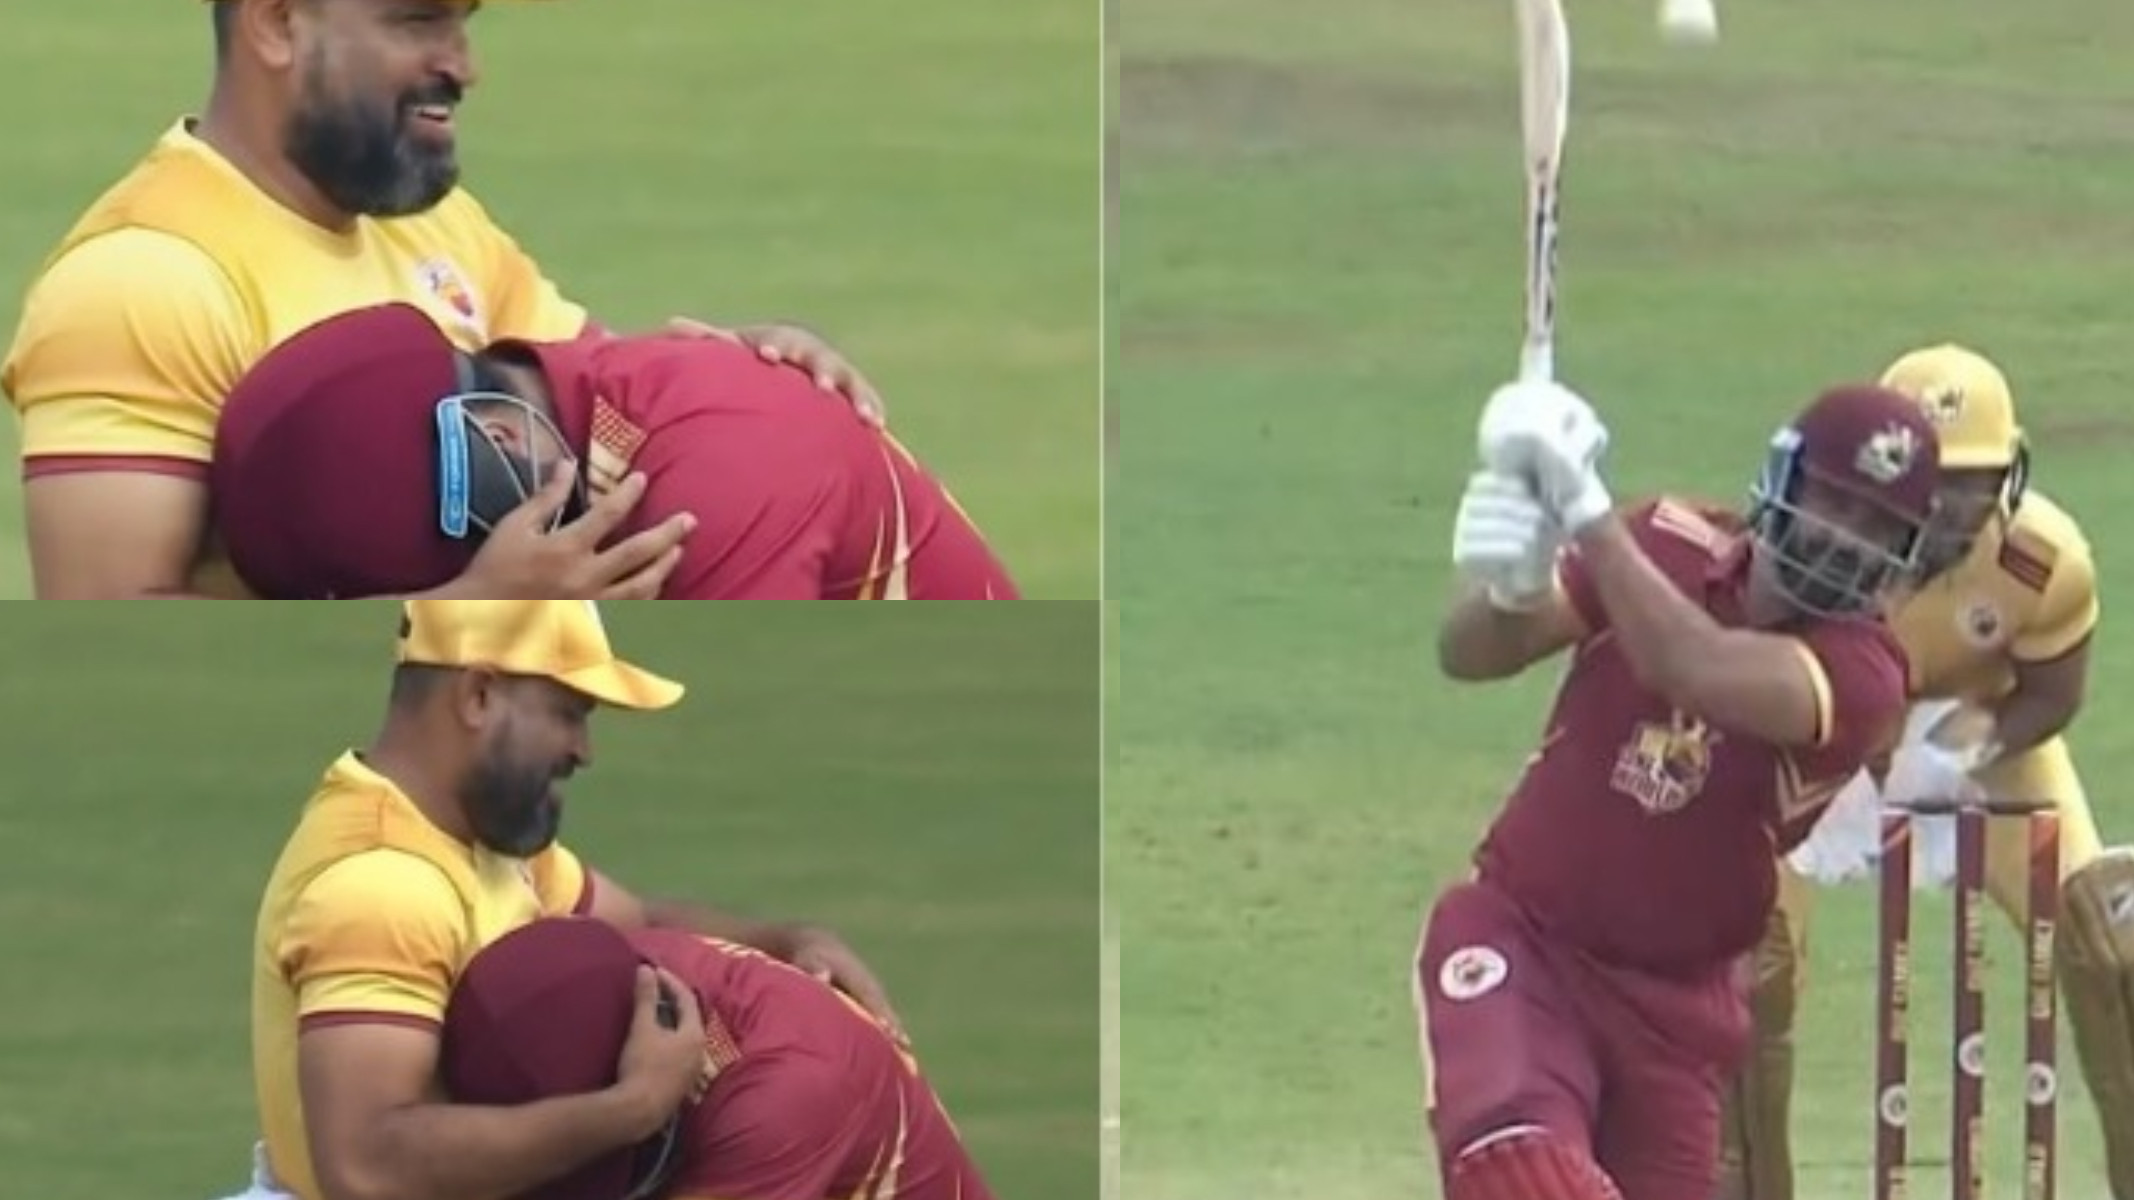 WATCH- “I feel proud when you hit sixes”- Yusuf Pathan replies to Irfan Pathan’s video of hitting him for a six